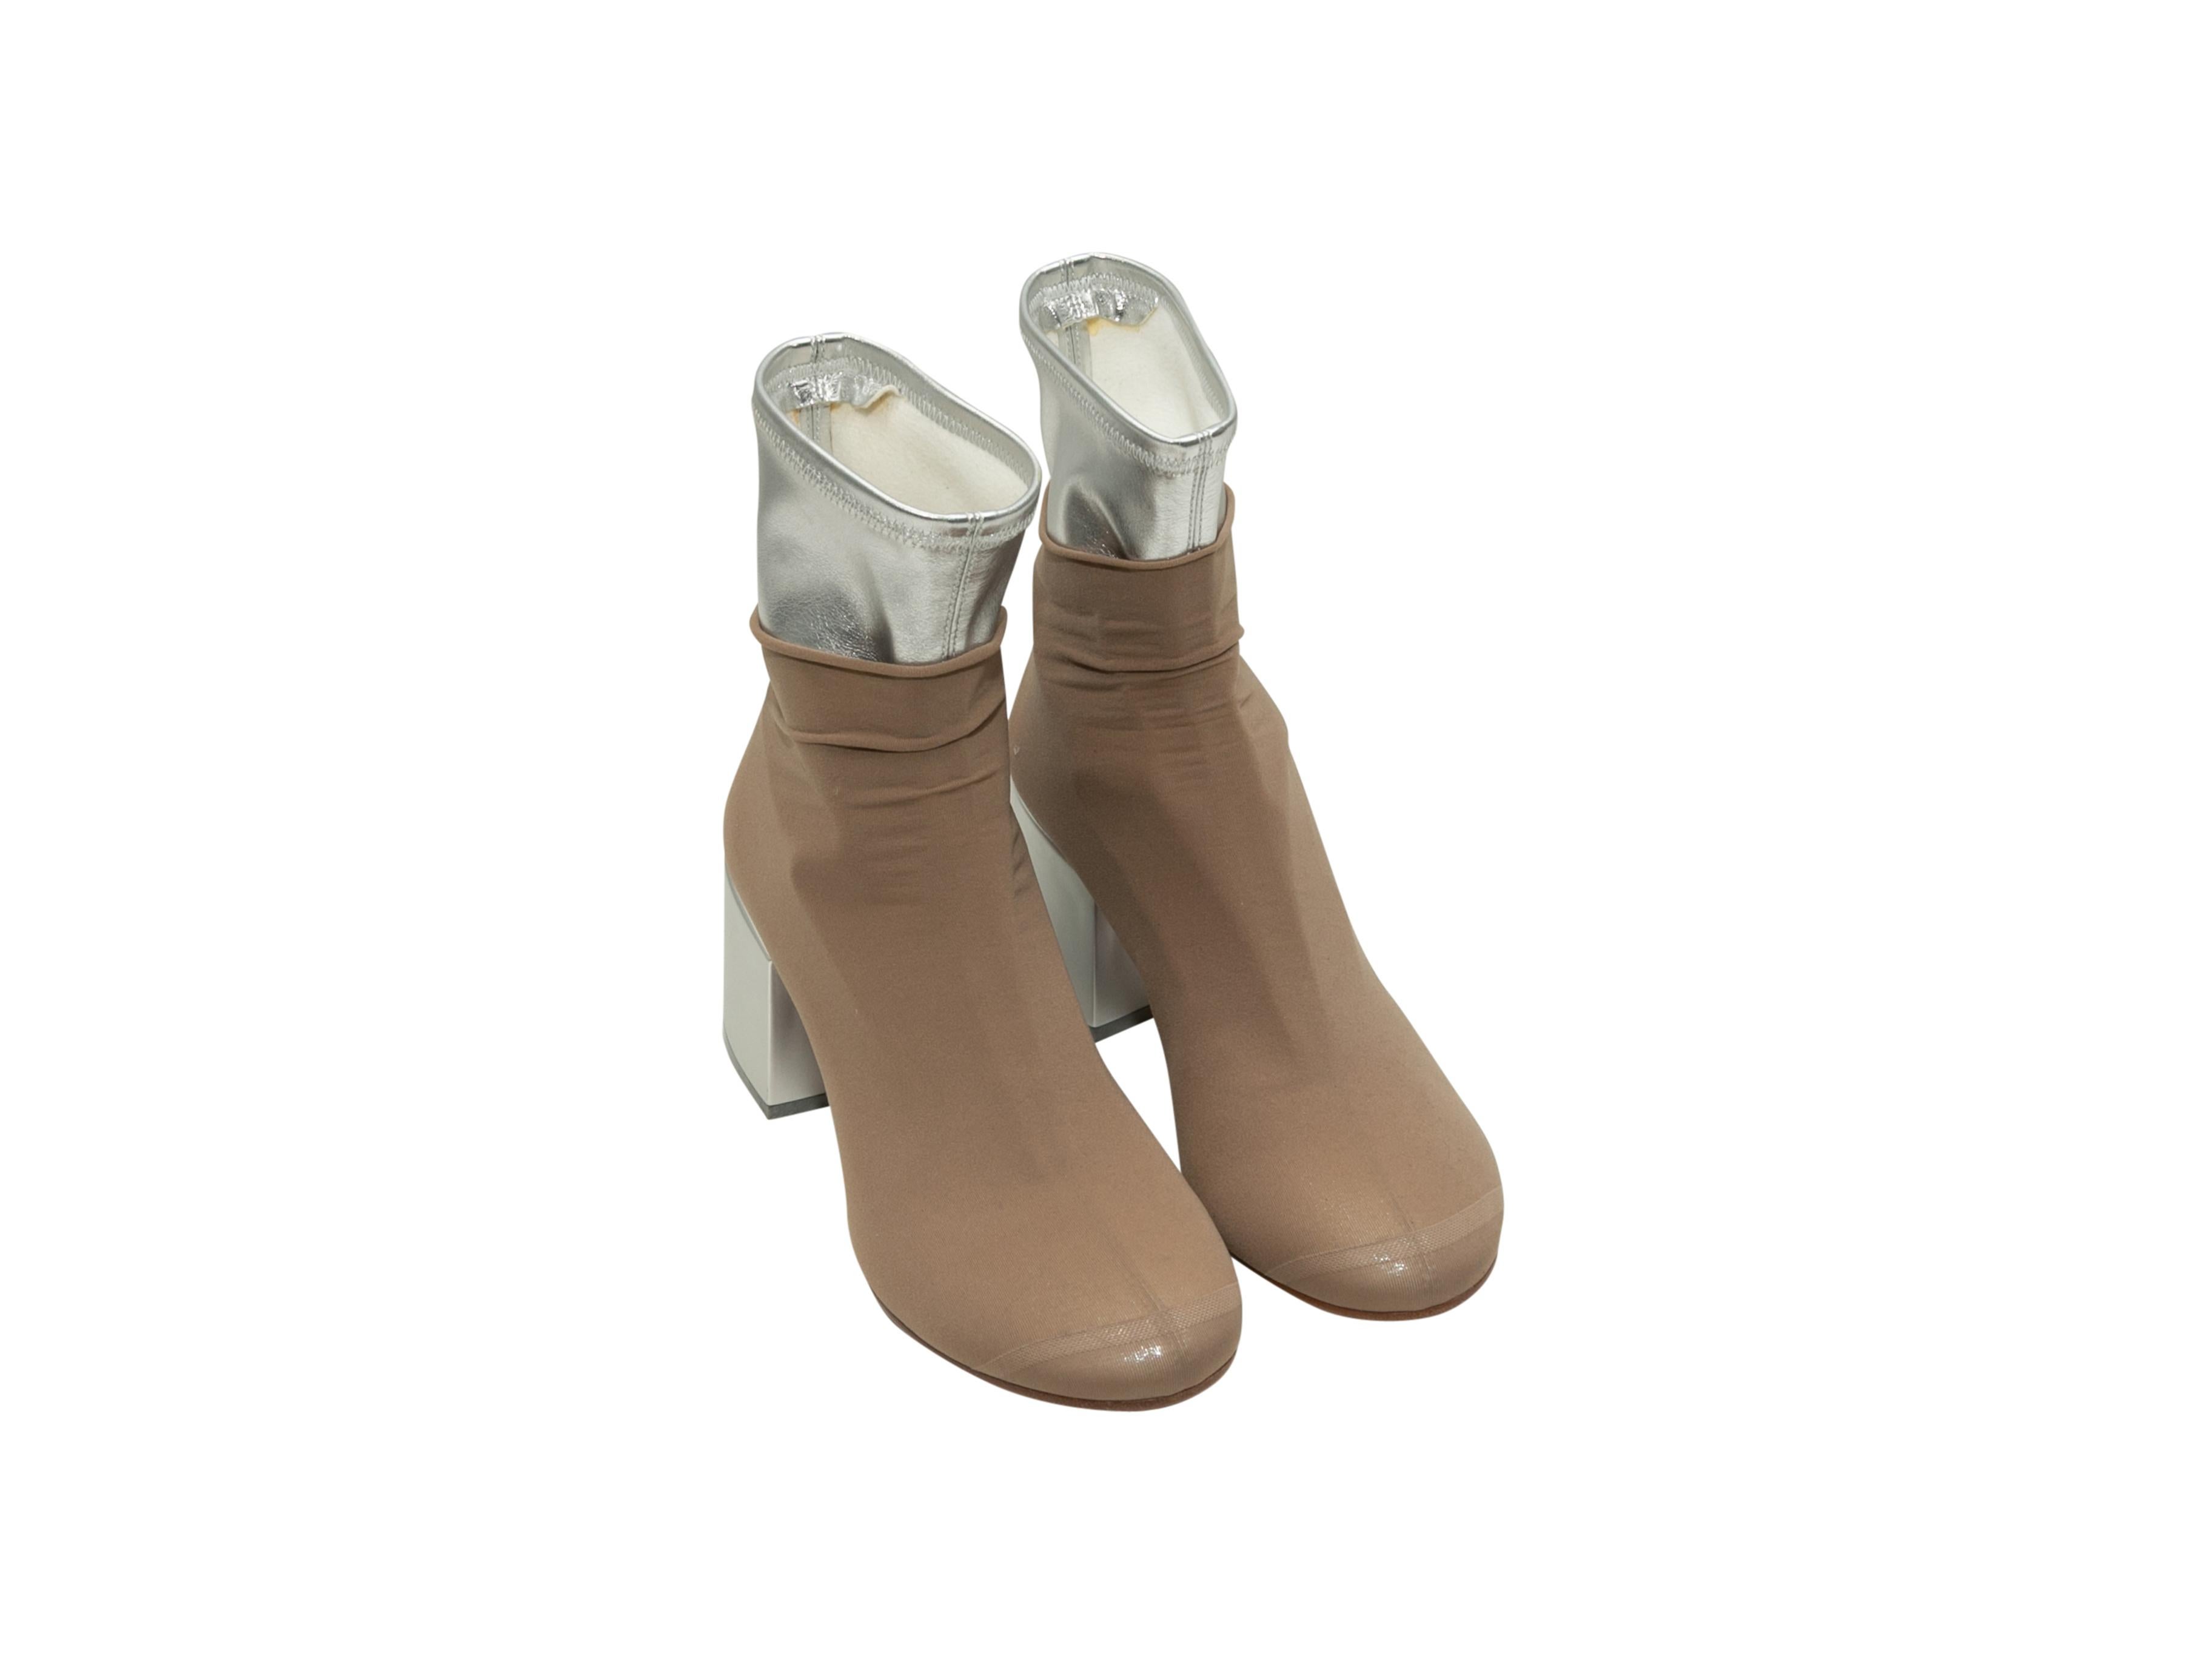 Product details: Beige and metallic silver leather sock ankle boots by MM6 Maison Margiela. Block heels. 2.75